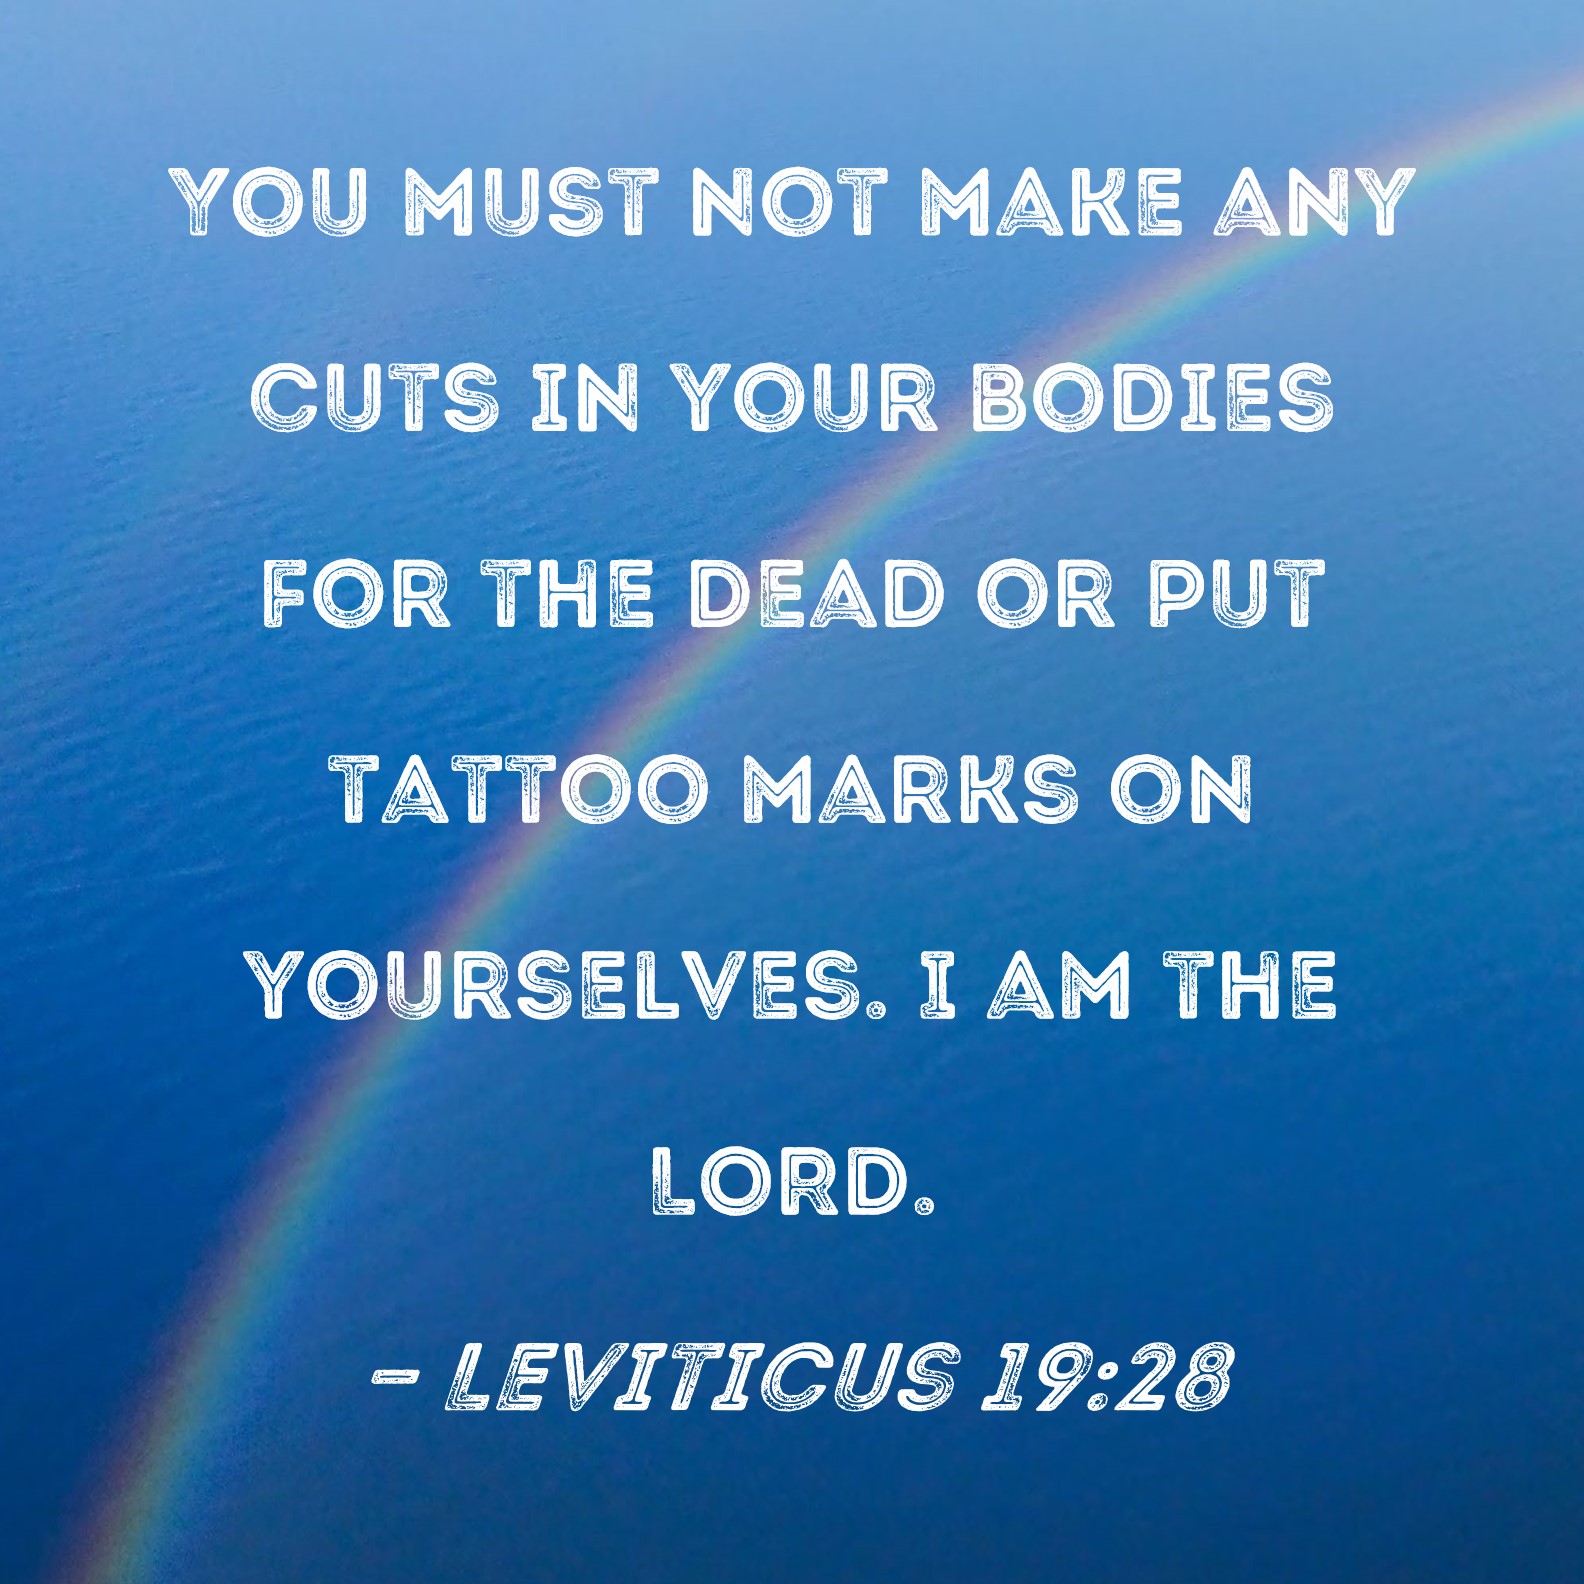 Leviticus 19:28 You must not make any cuts in your bodies for the dead or  put tattoo marks on yourselves. I am the LORD.